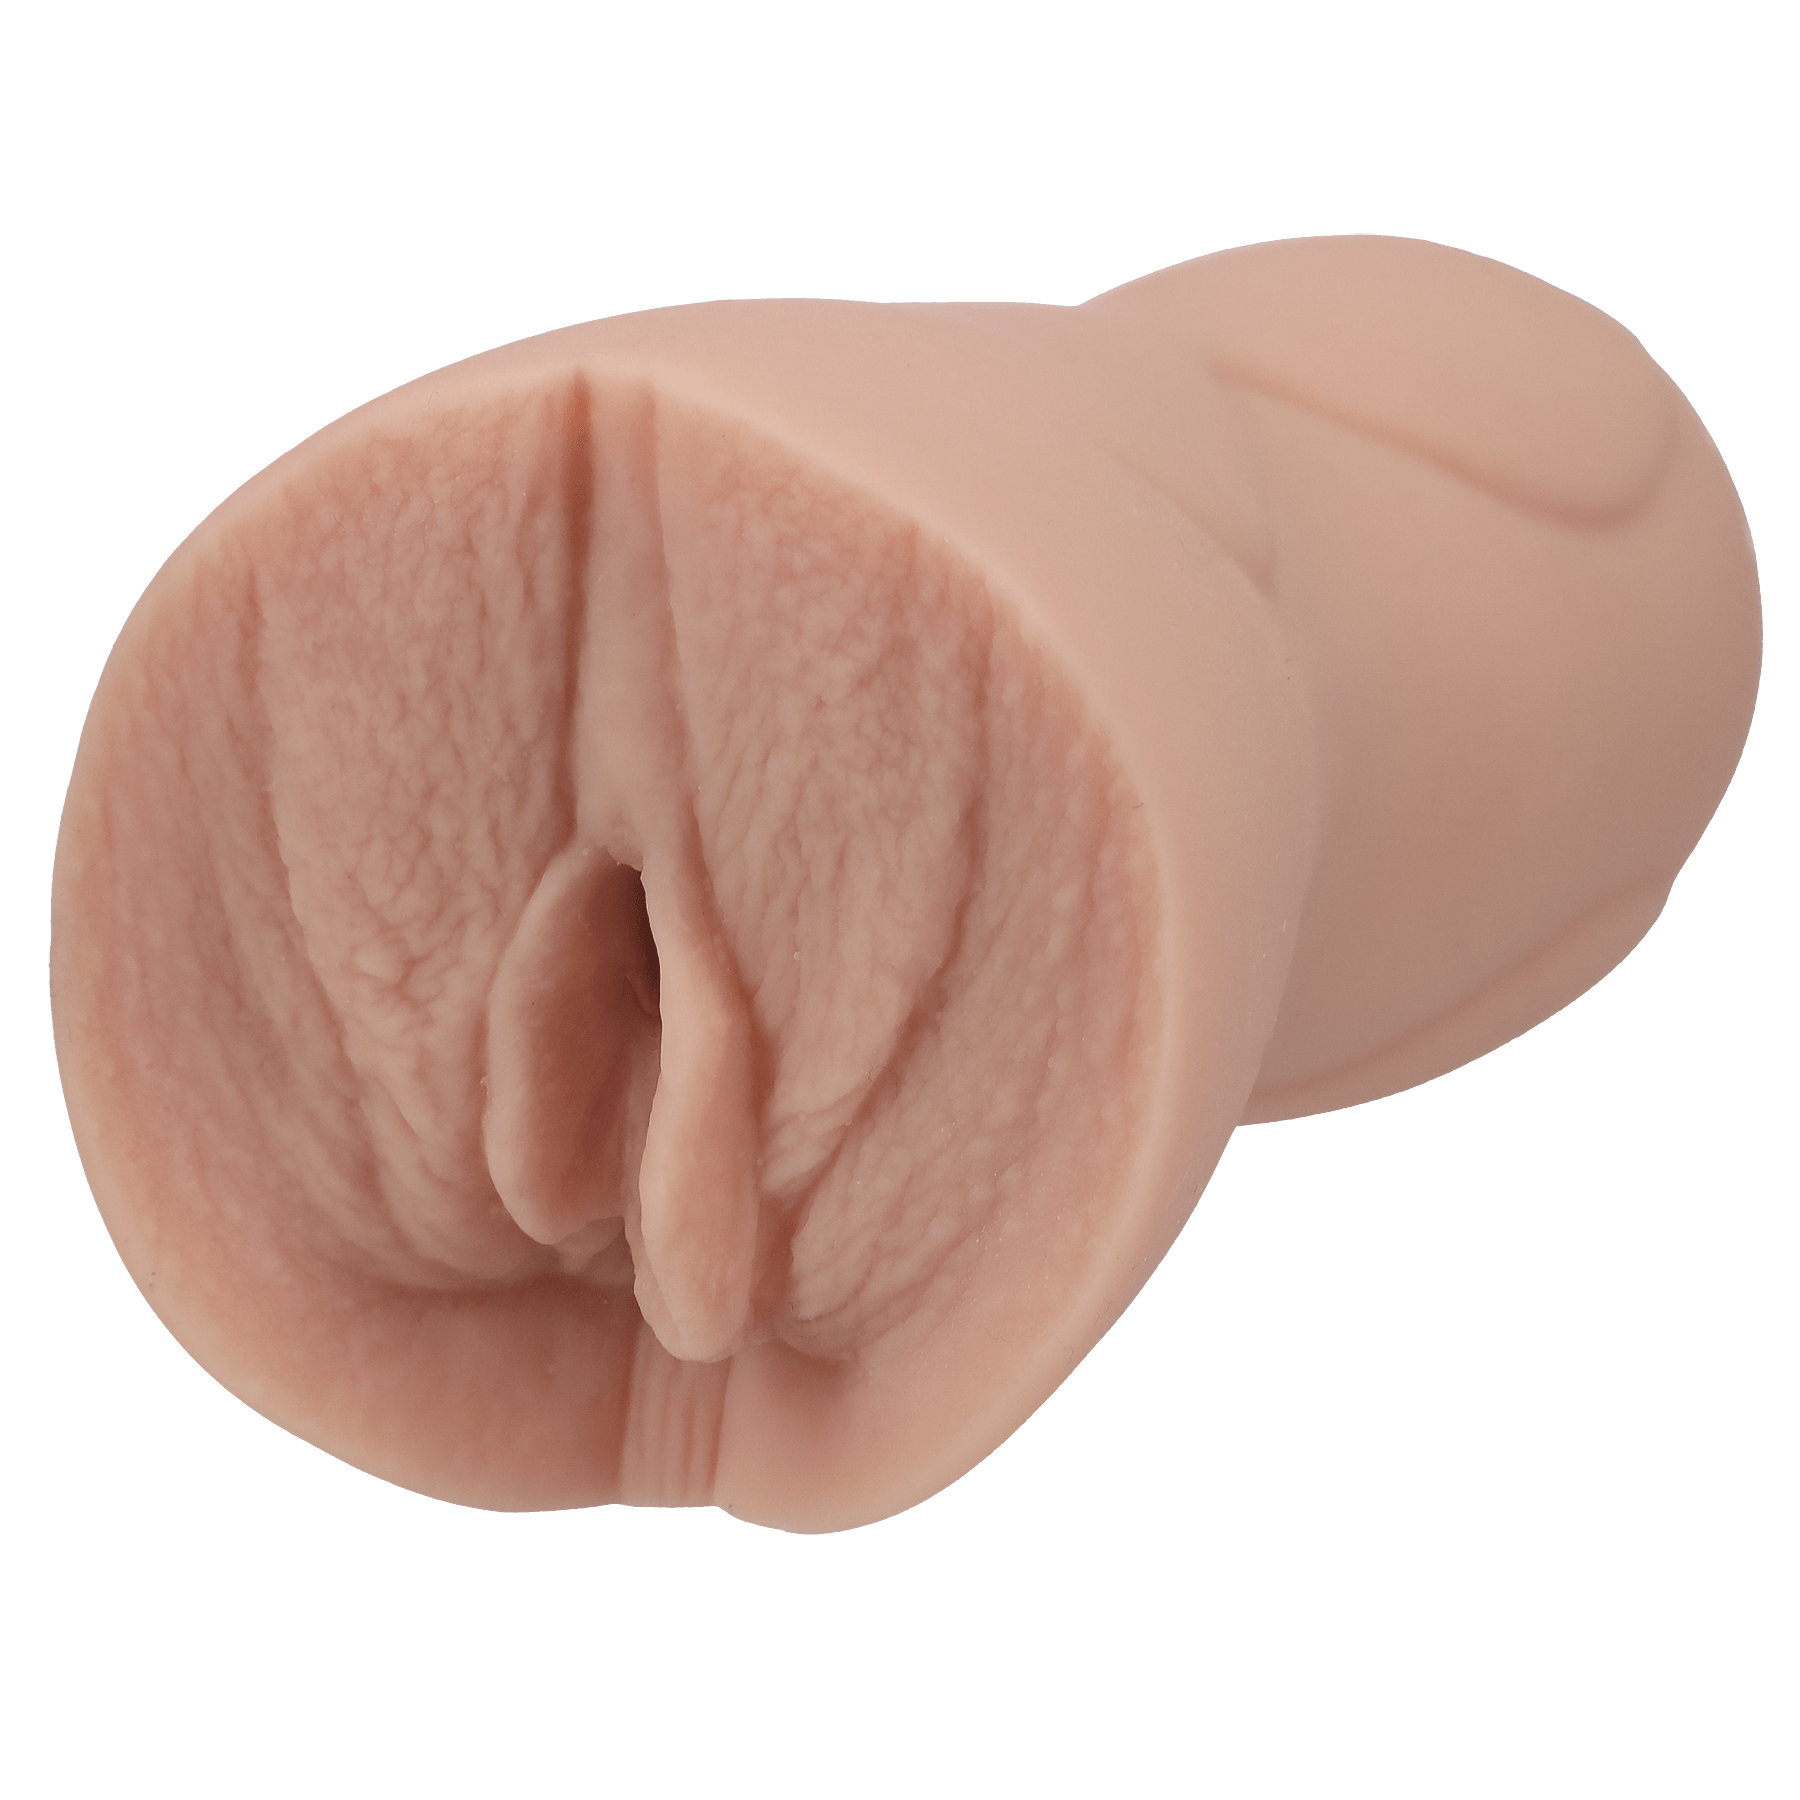 Signature Strokers Bridgette B - Buy At Luxury Toy X - Free 3-Day Shipping